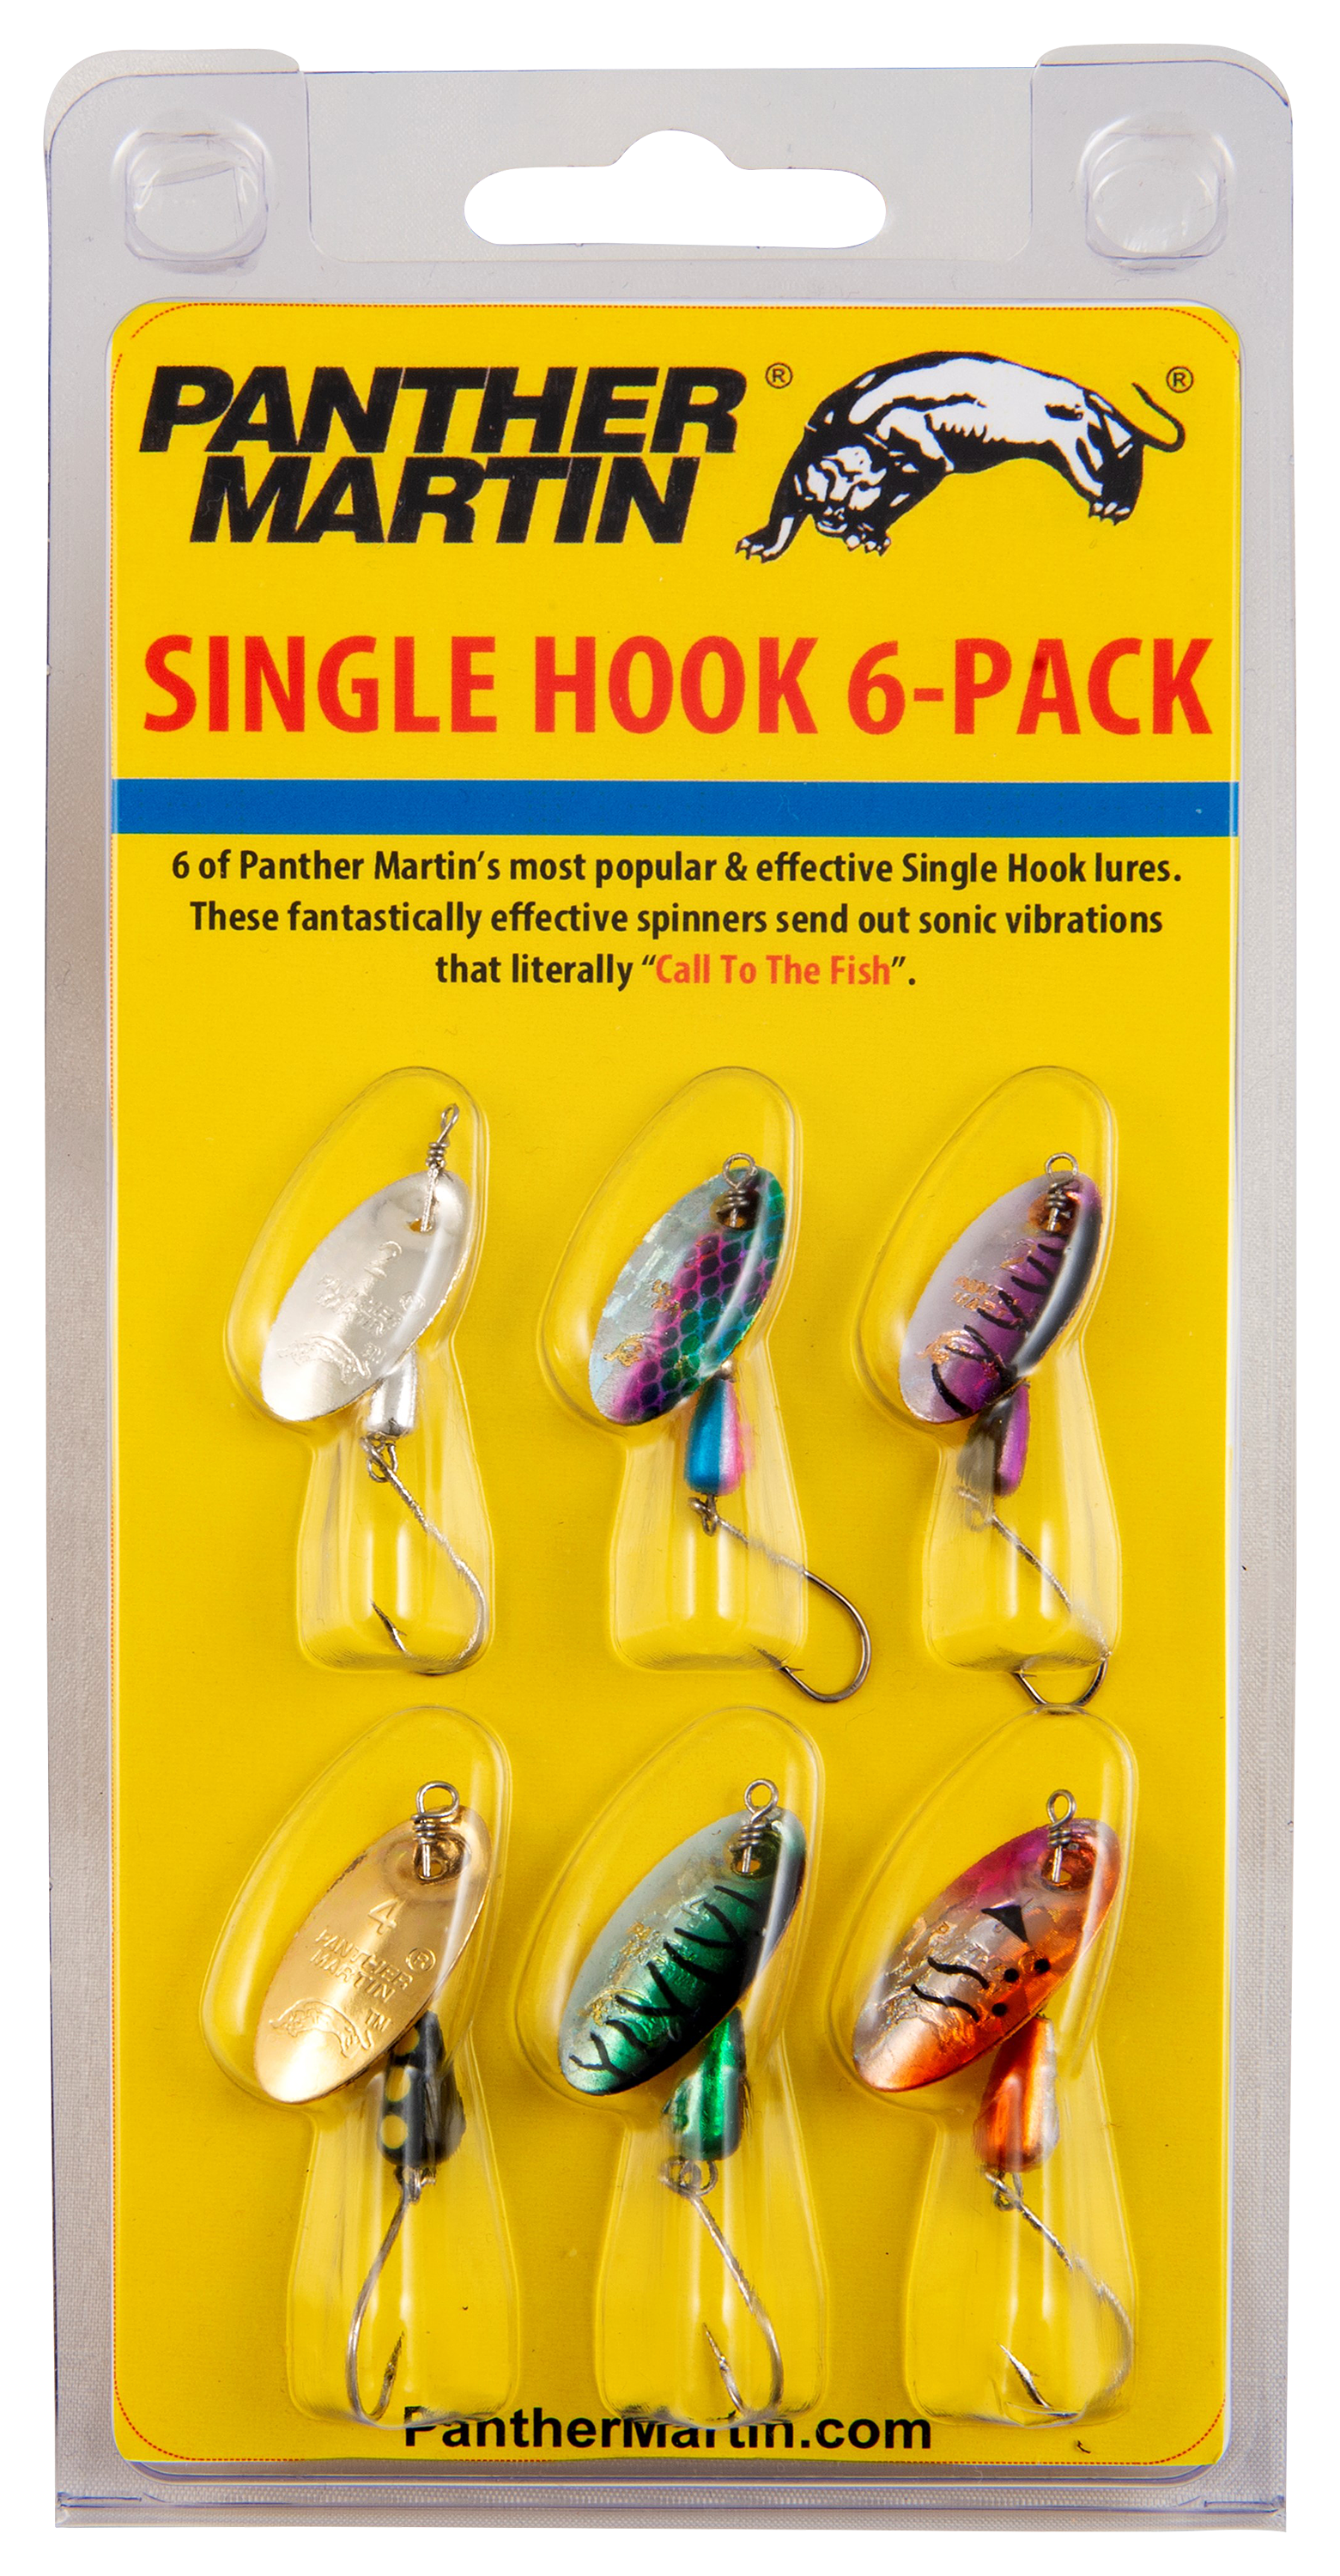 Panther Martin Fishing Lures 6-Pack All Time Greatest Fish Catcher